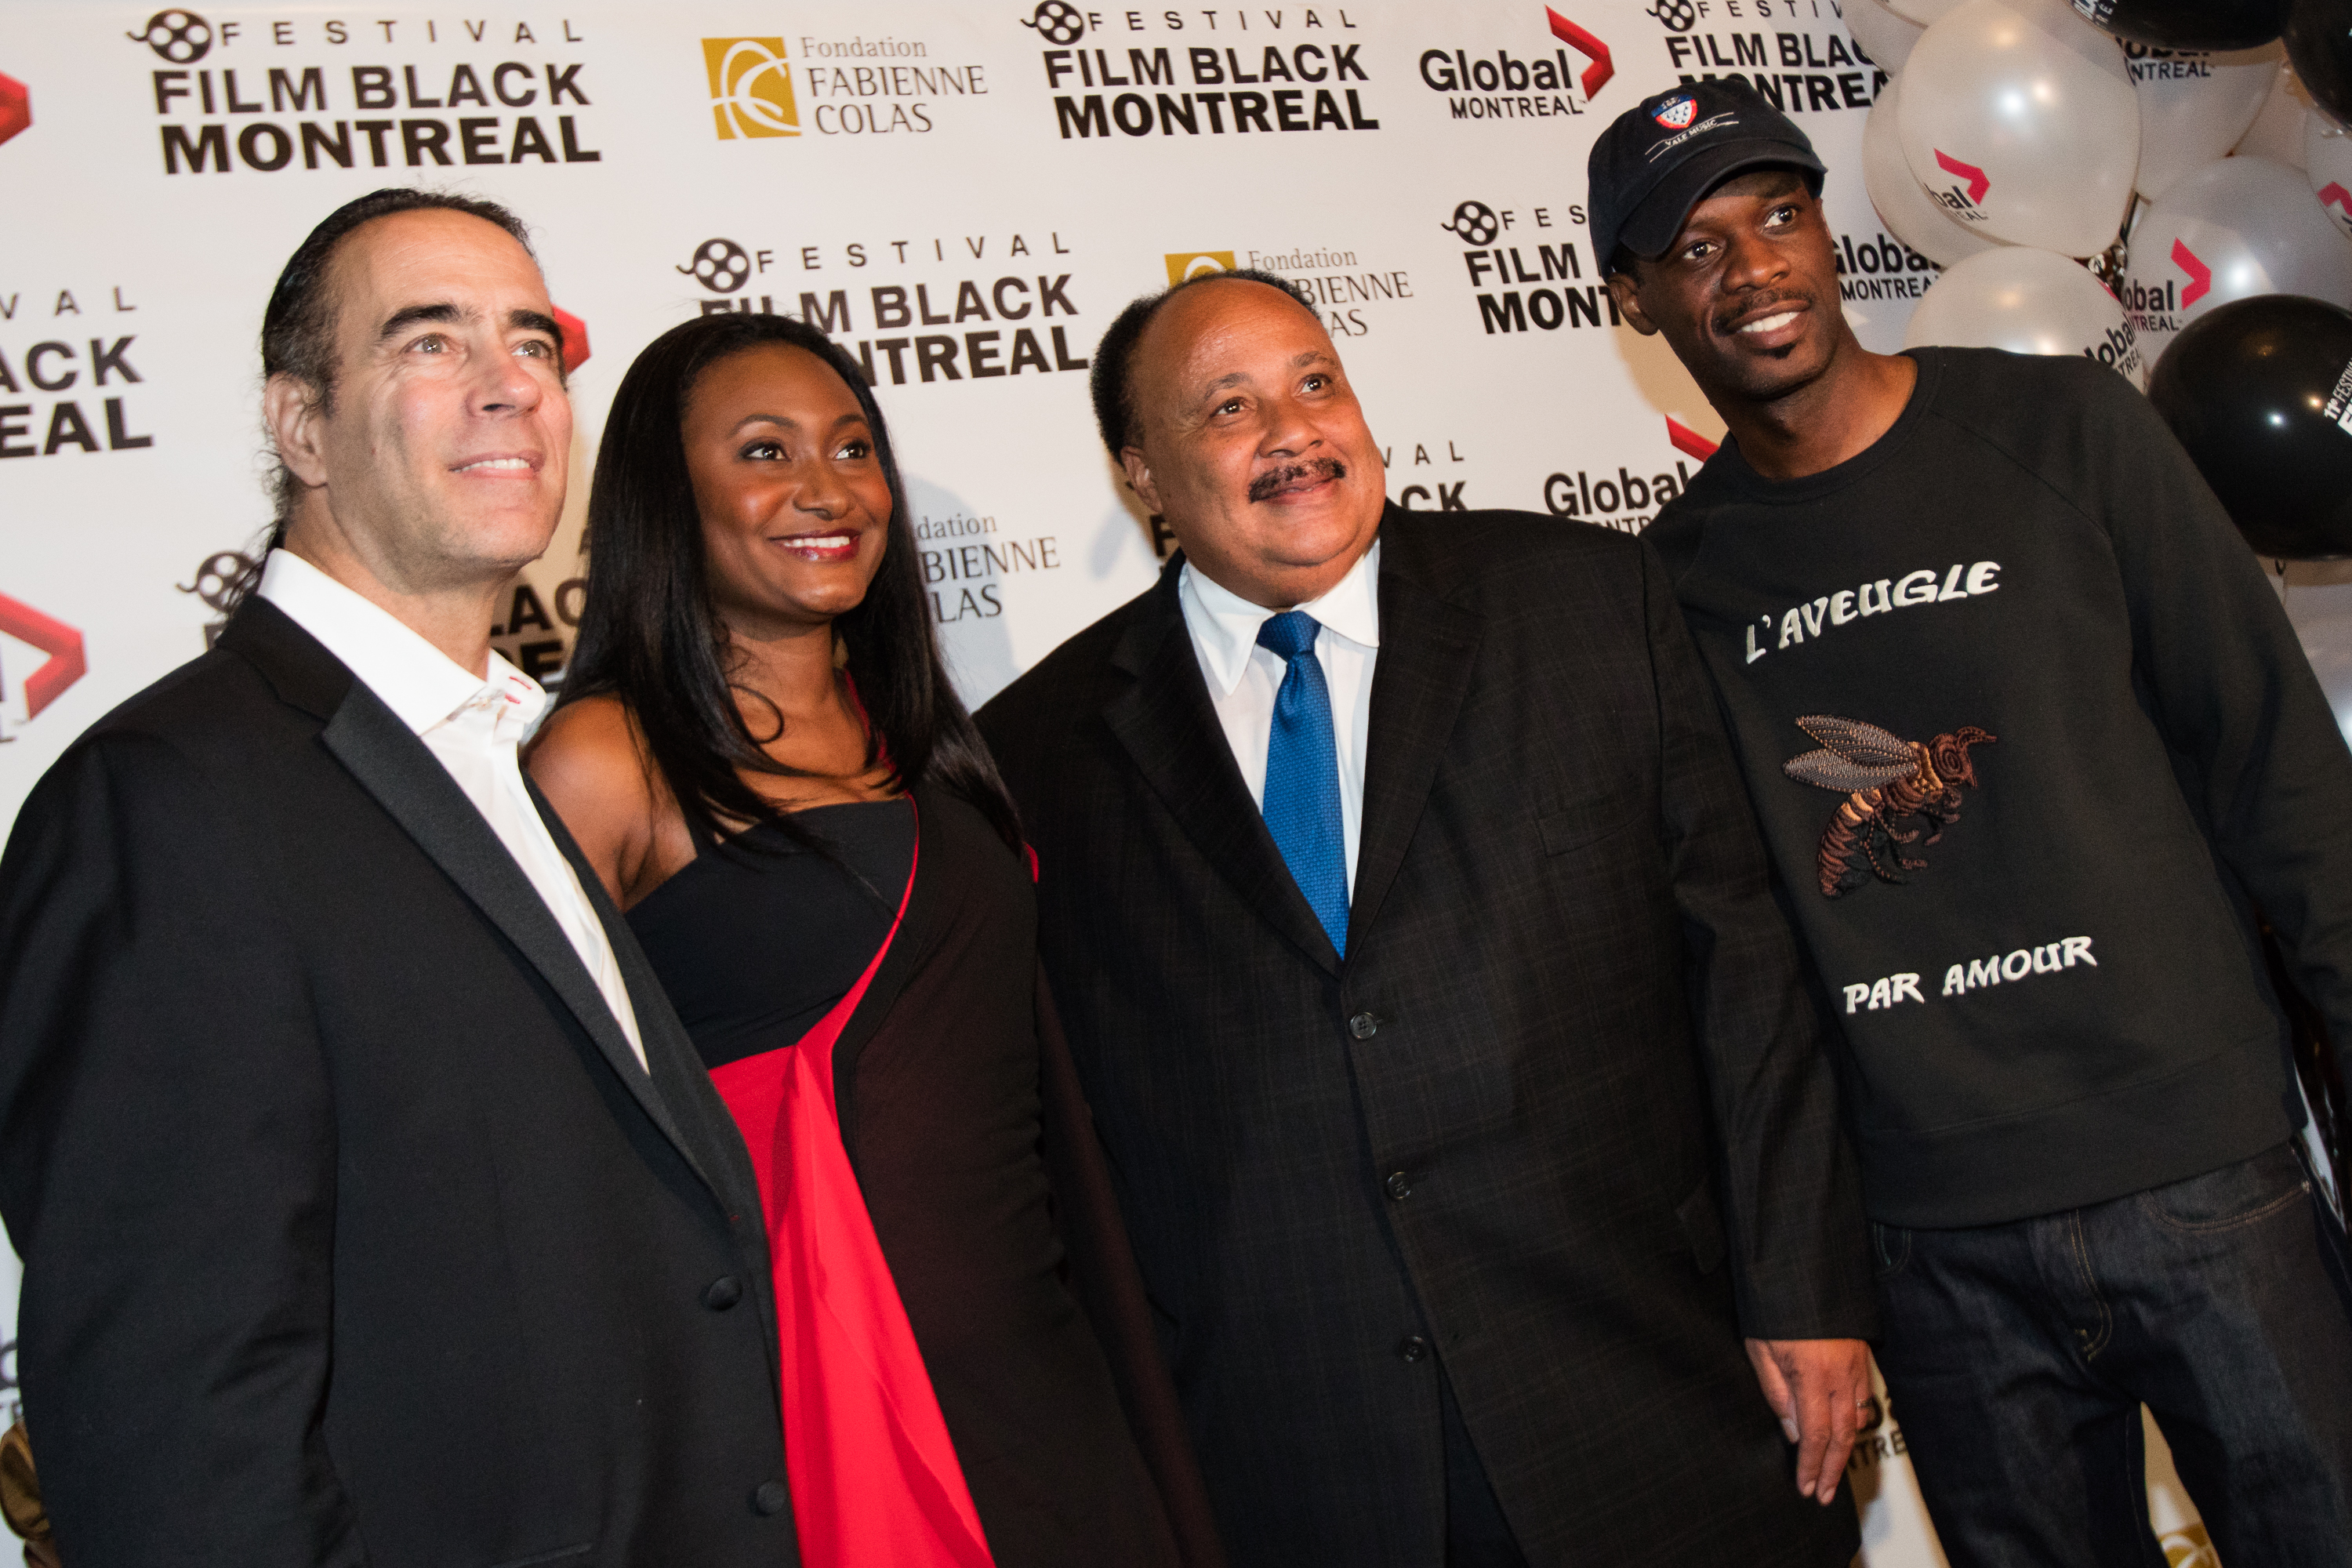 Émile Castonguay, director of programming, Fabienne Colas, festival founder, Martin Luther King III and Pras Michel on Red Carpet of MIBFF. Photo by Marie-Pier Savard.